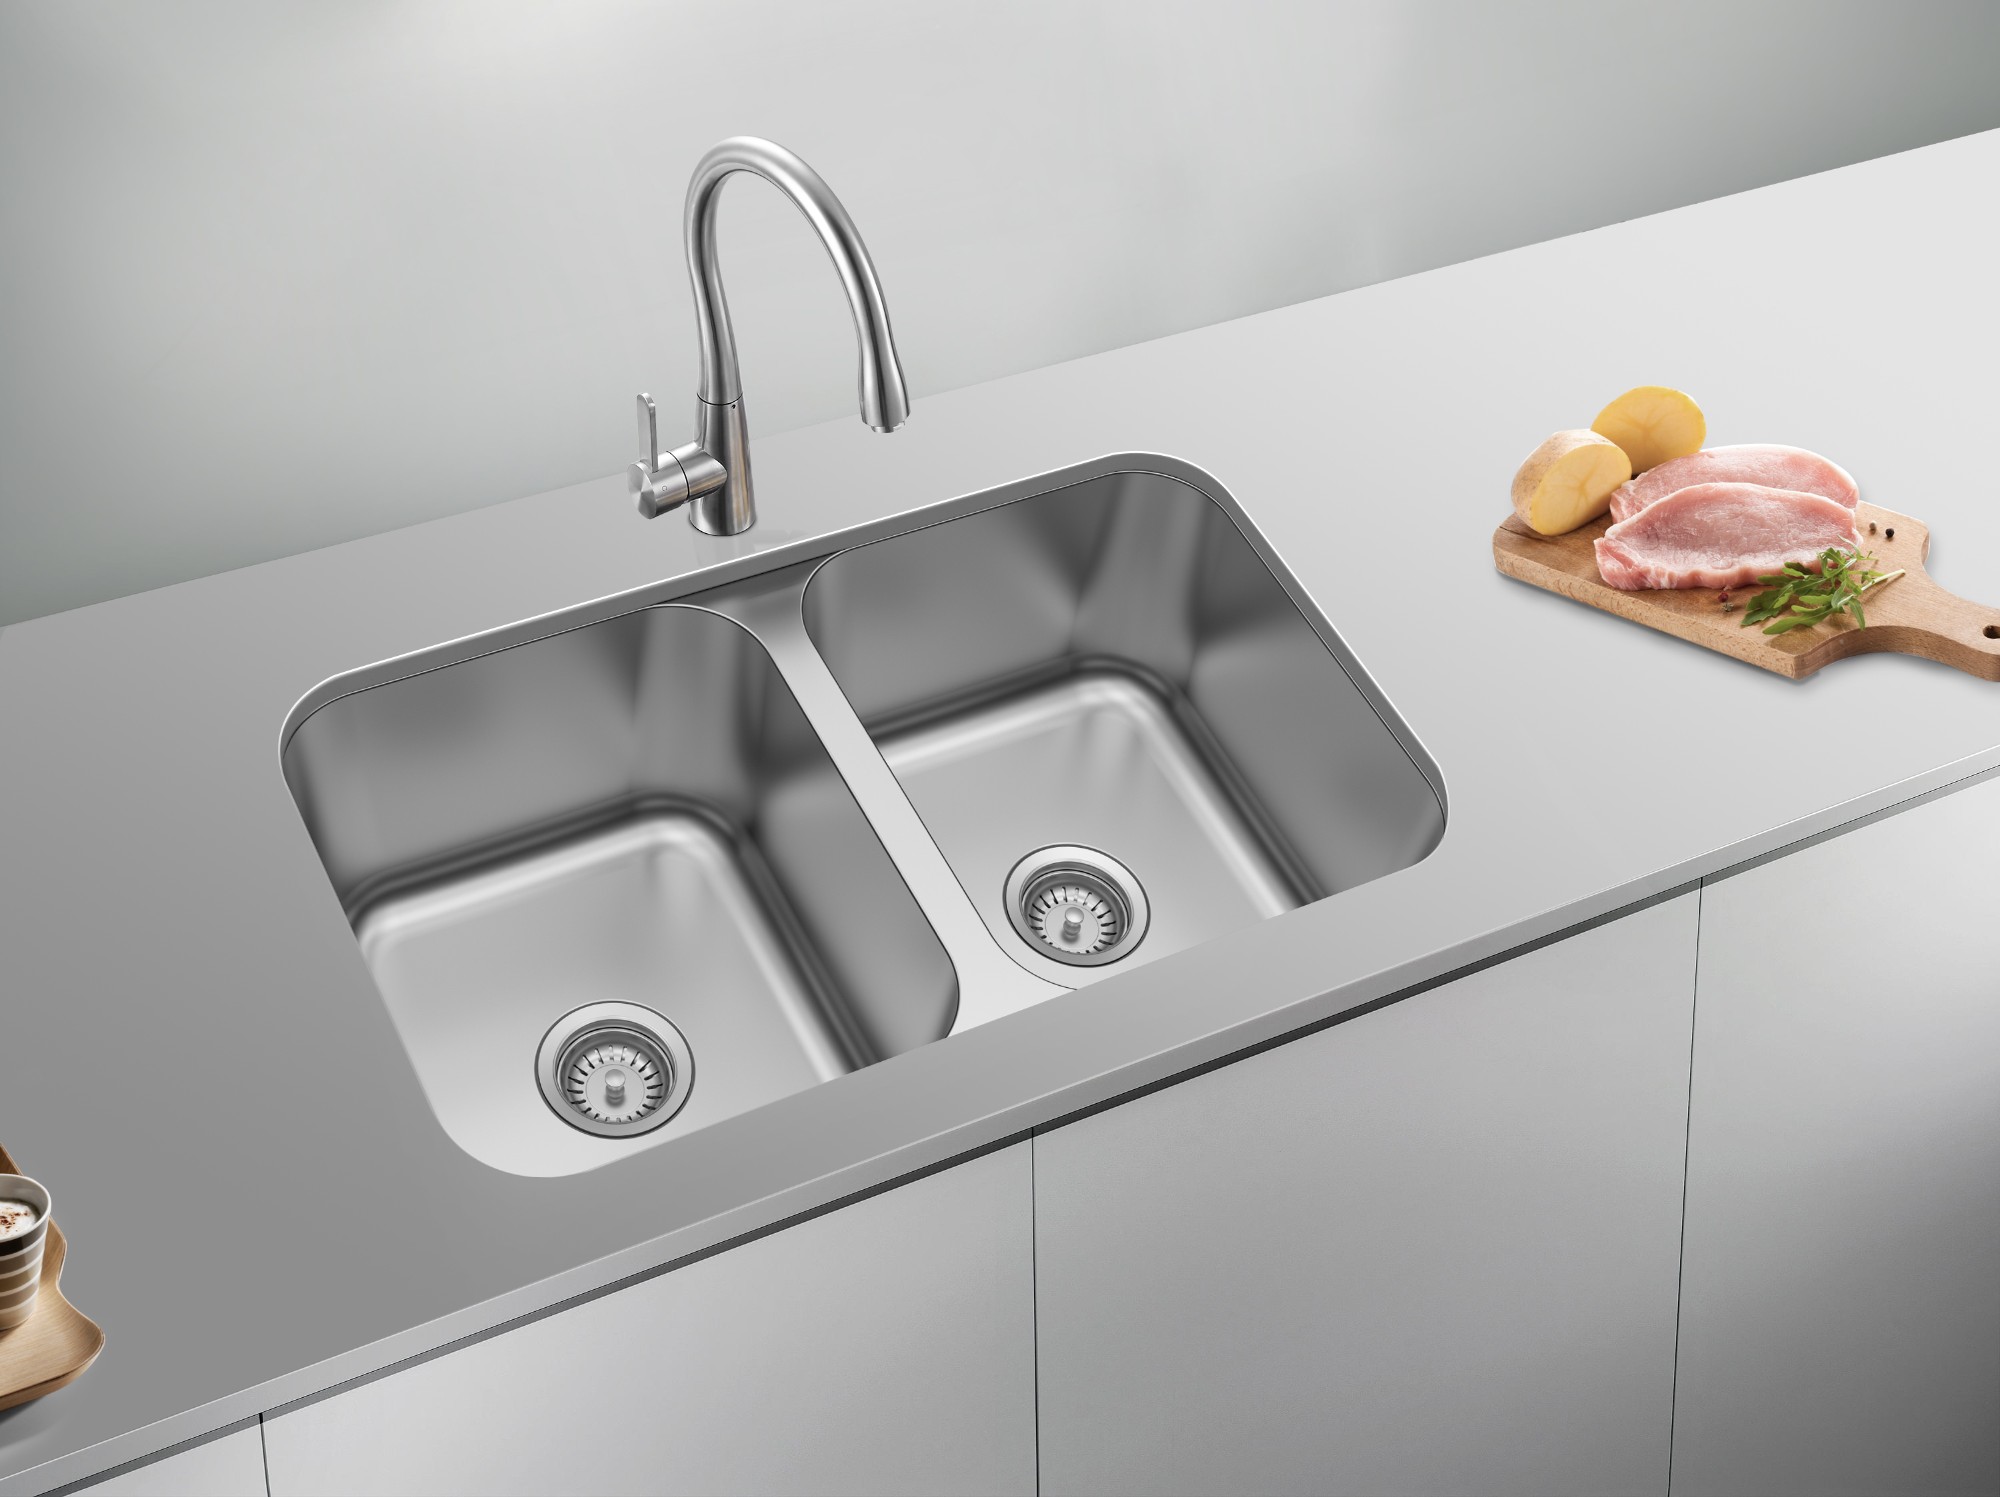 Double Bowl Stainless Steel Sink Undermount